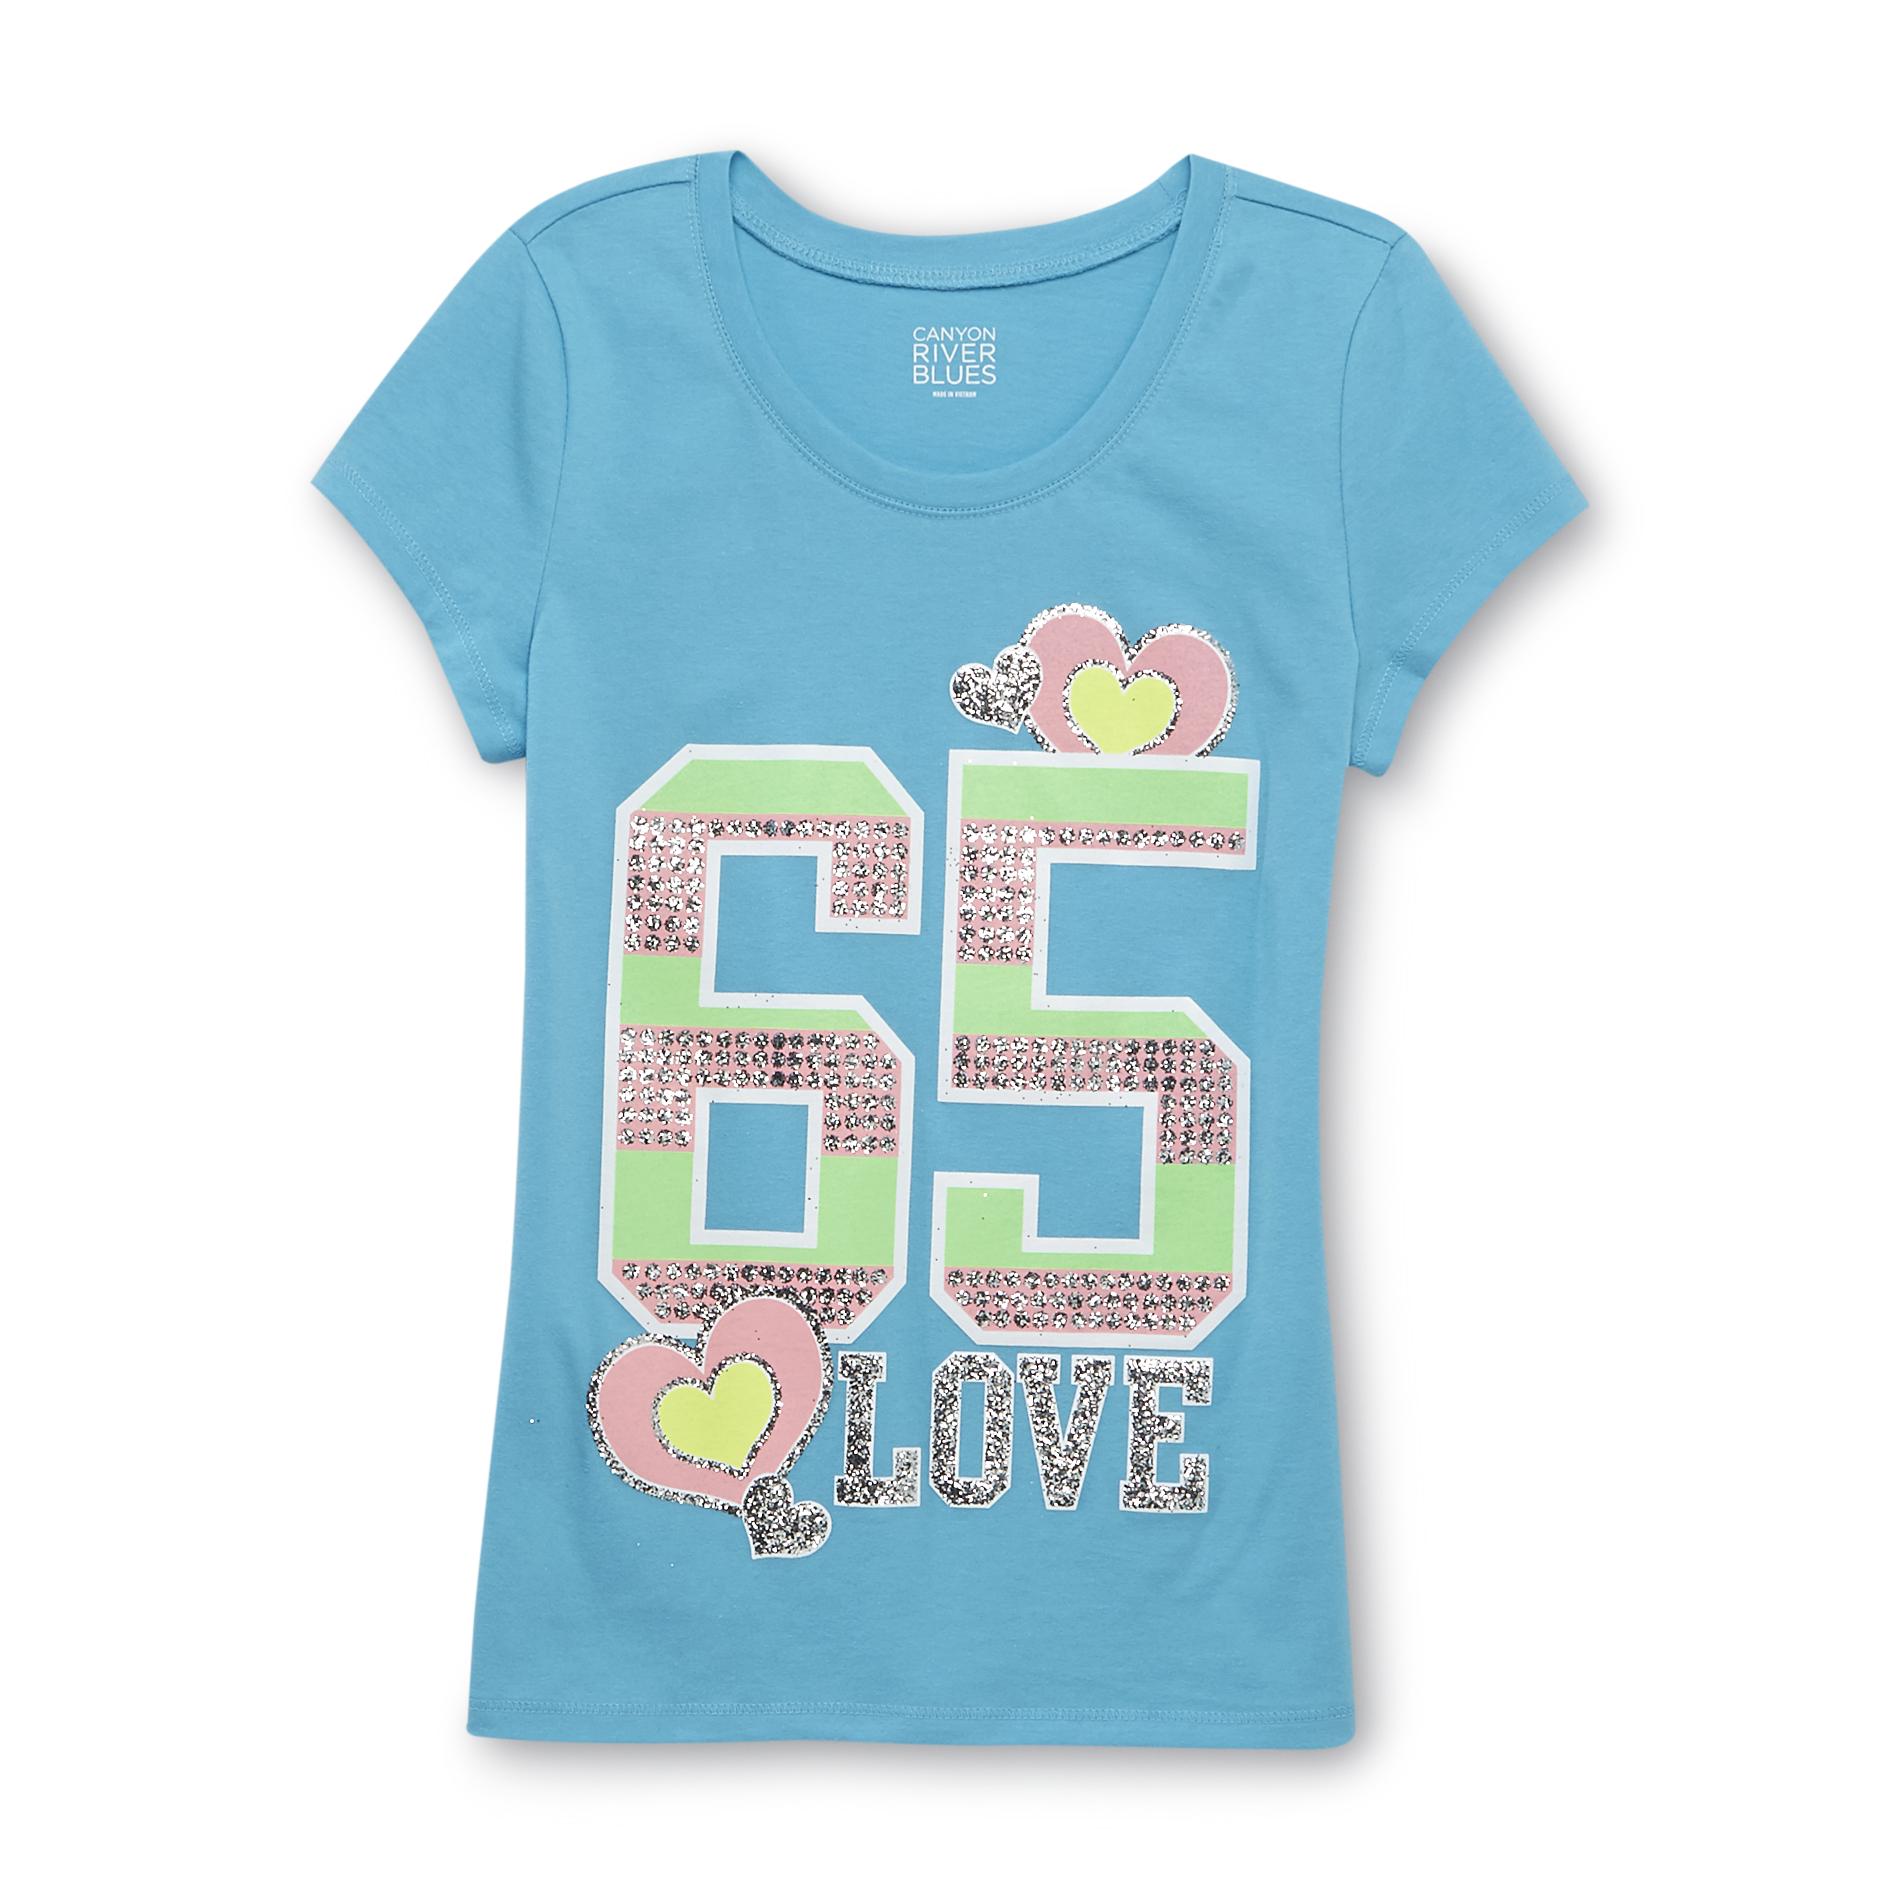 Canyon River Blues Girl's Graphic T-Shirt - 65 Love